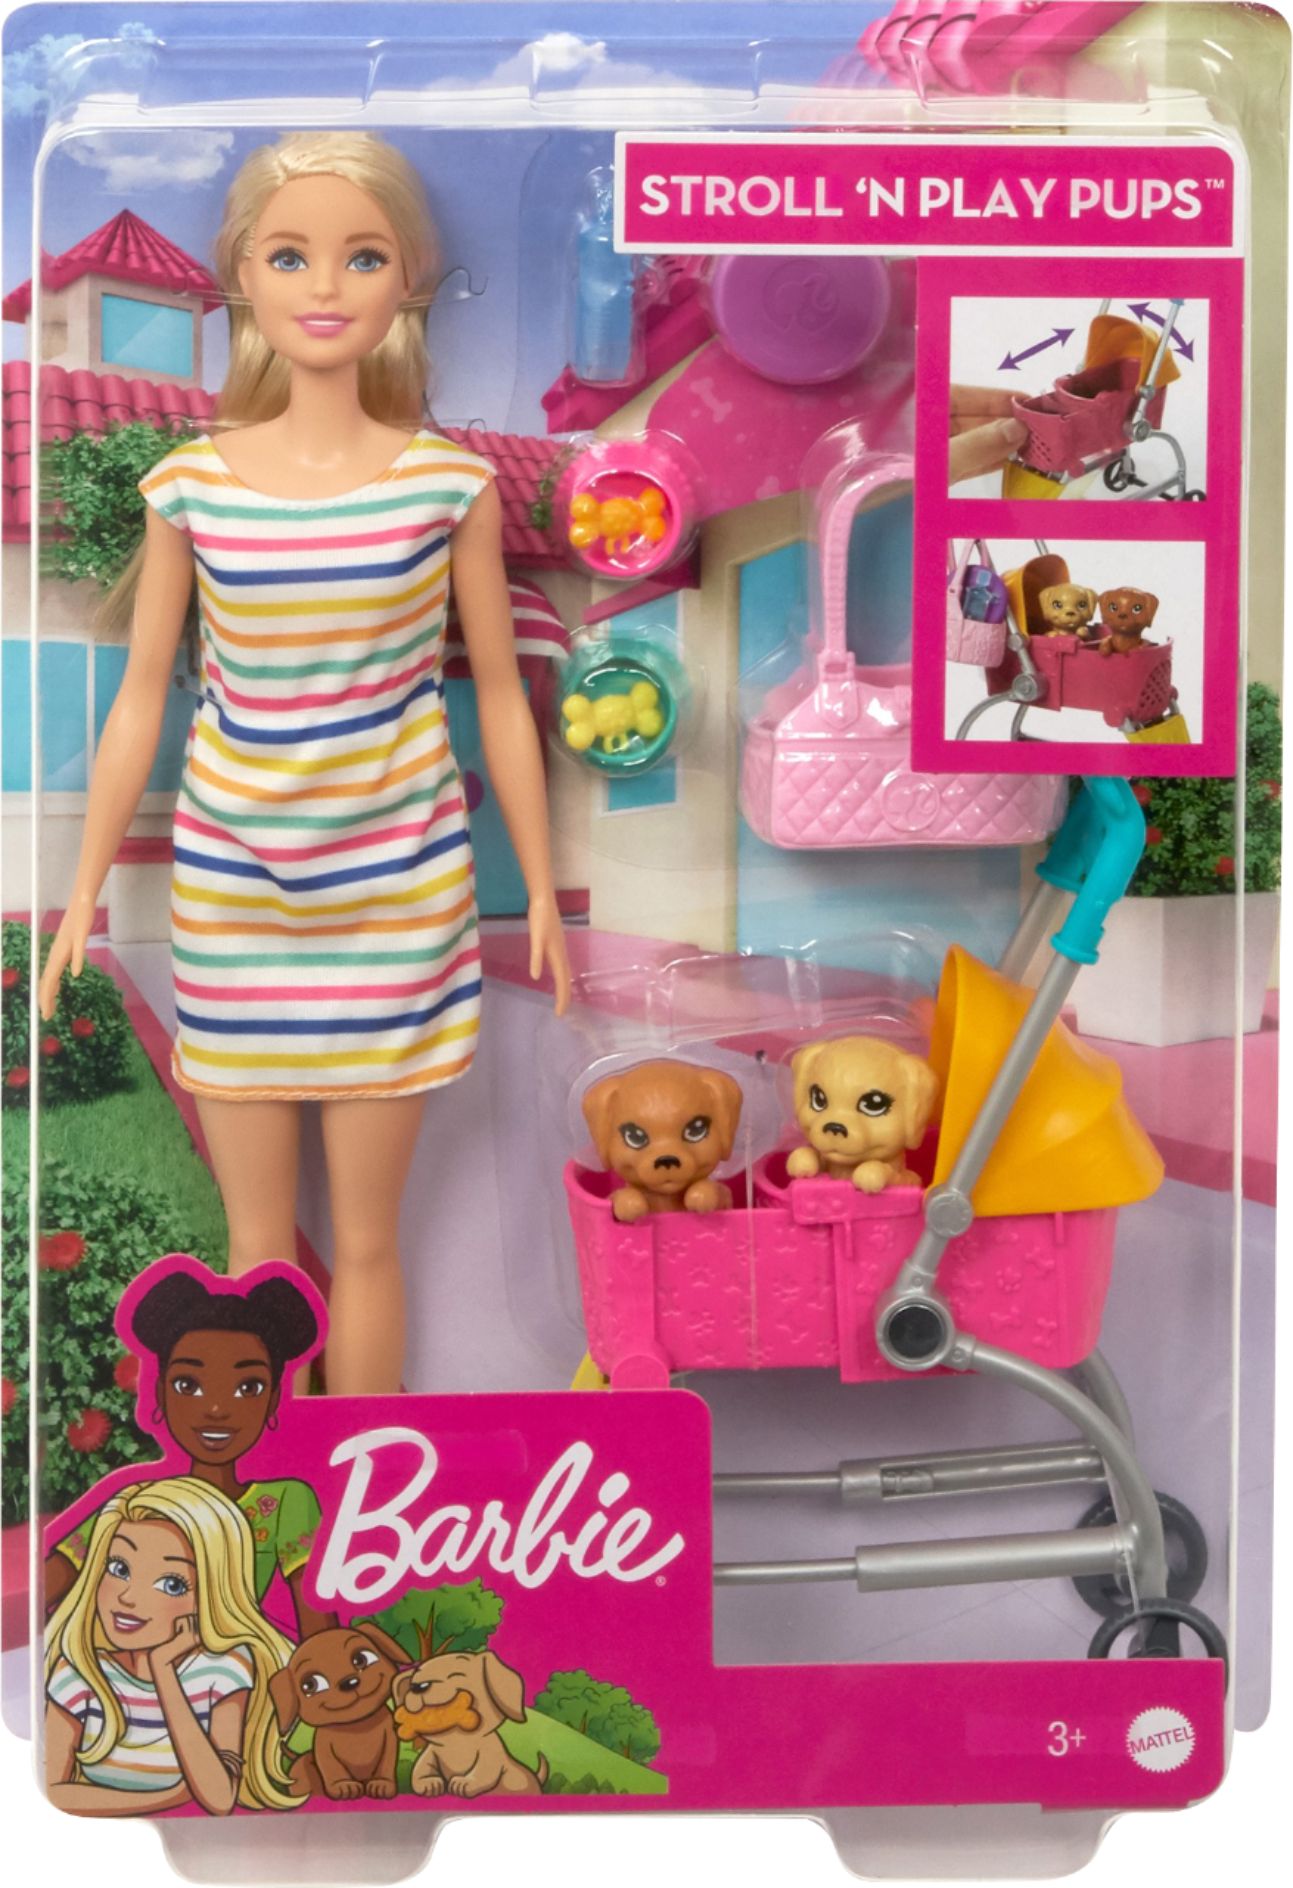 Best Buy: Barbie Stroll ‘n Play Pups Doll and Accessories GHV92